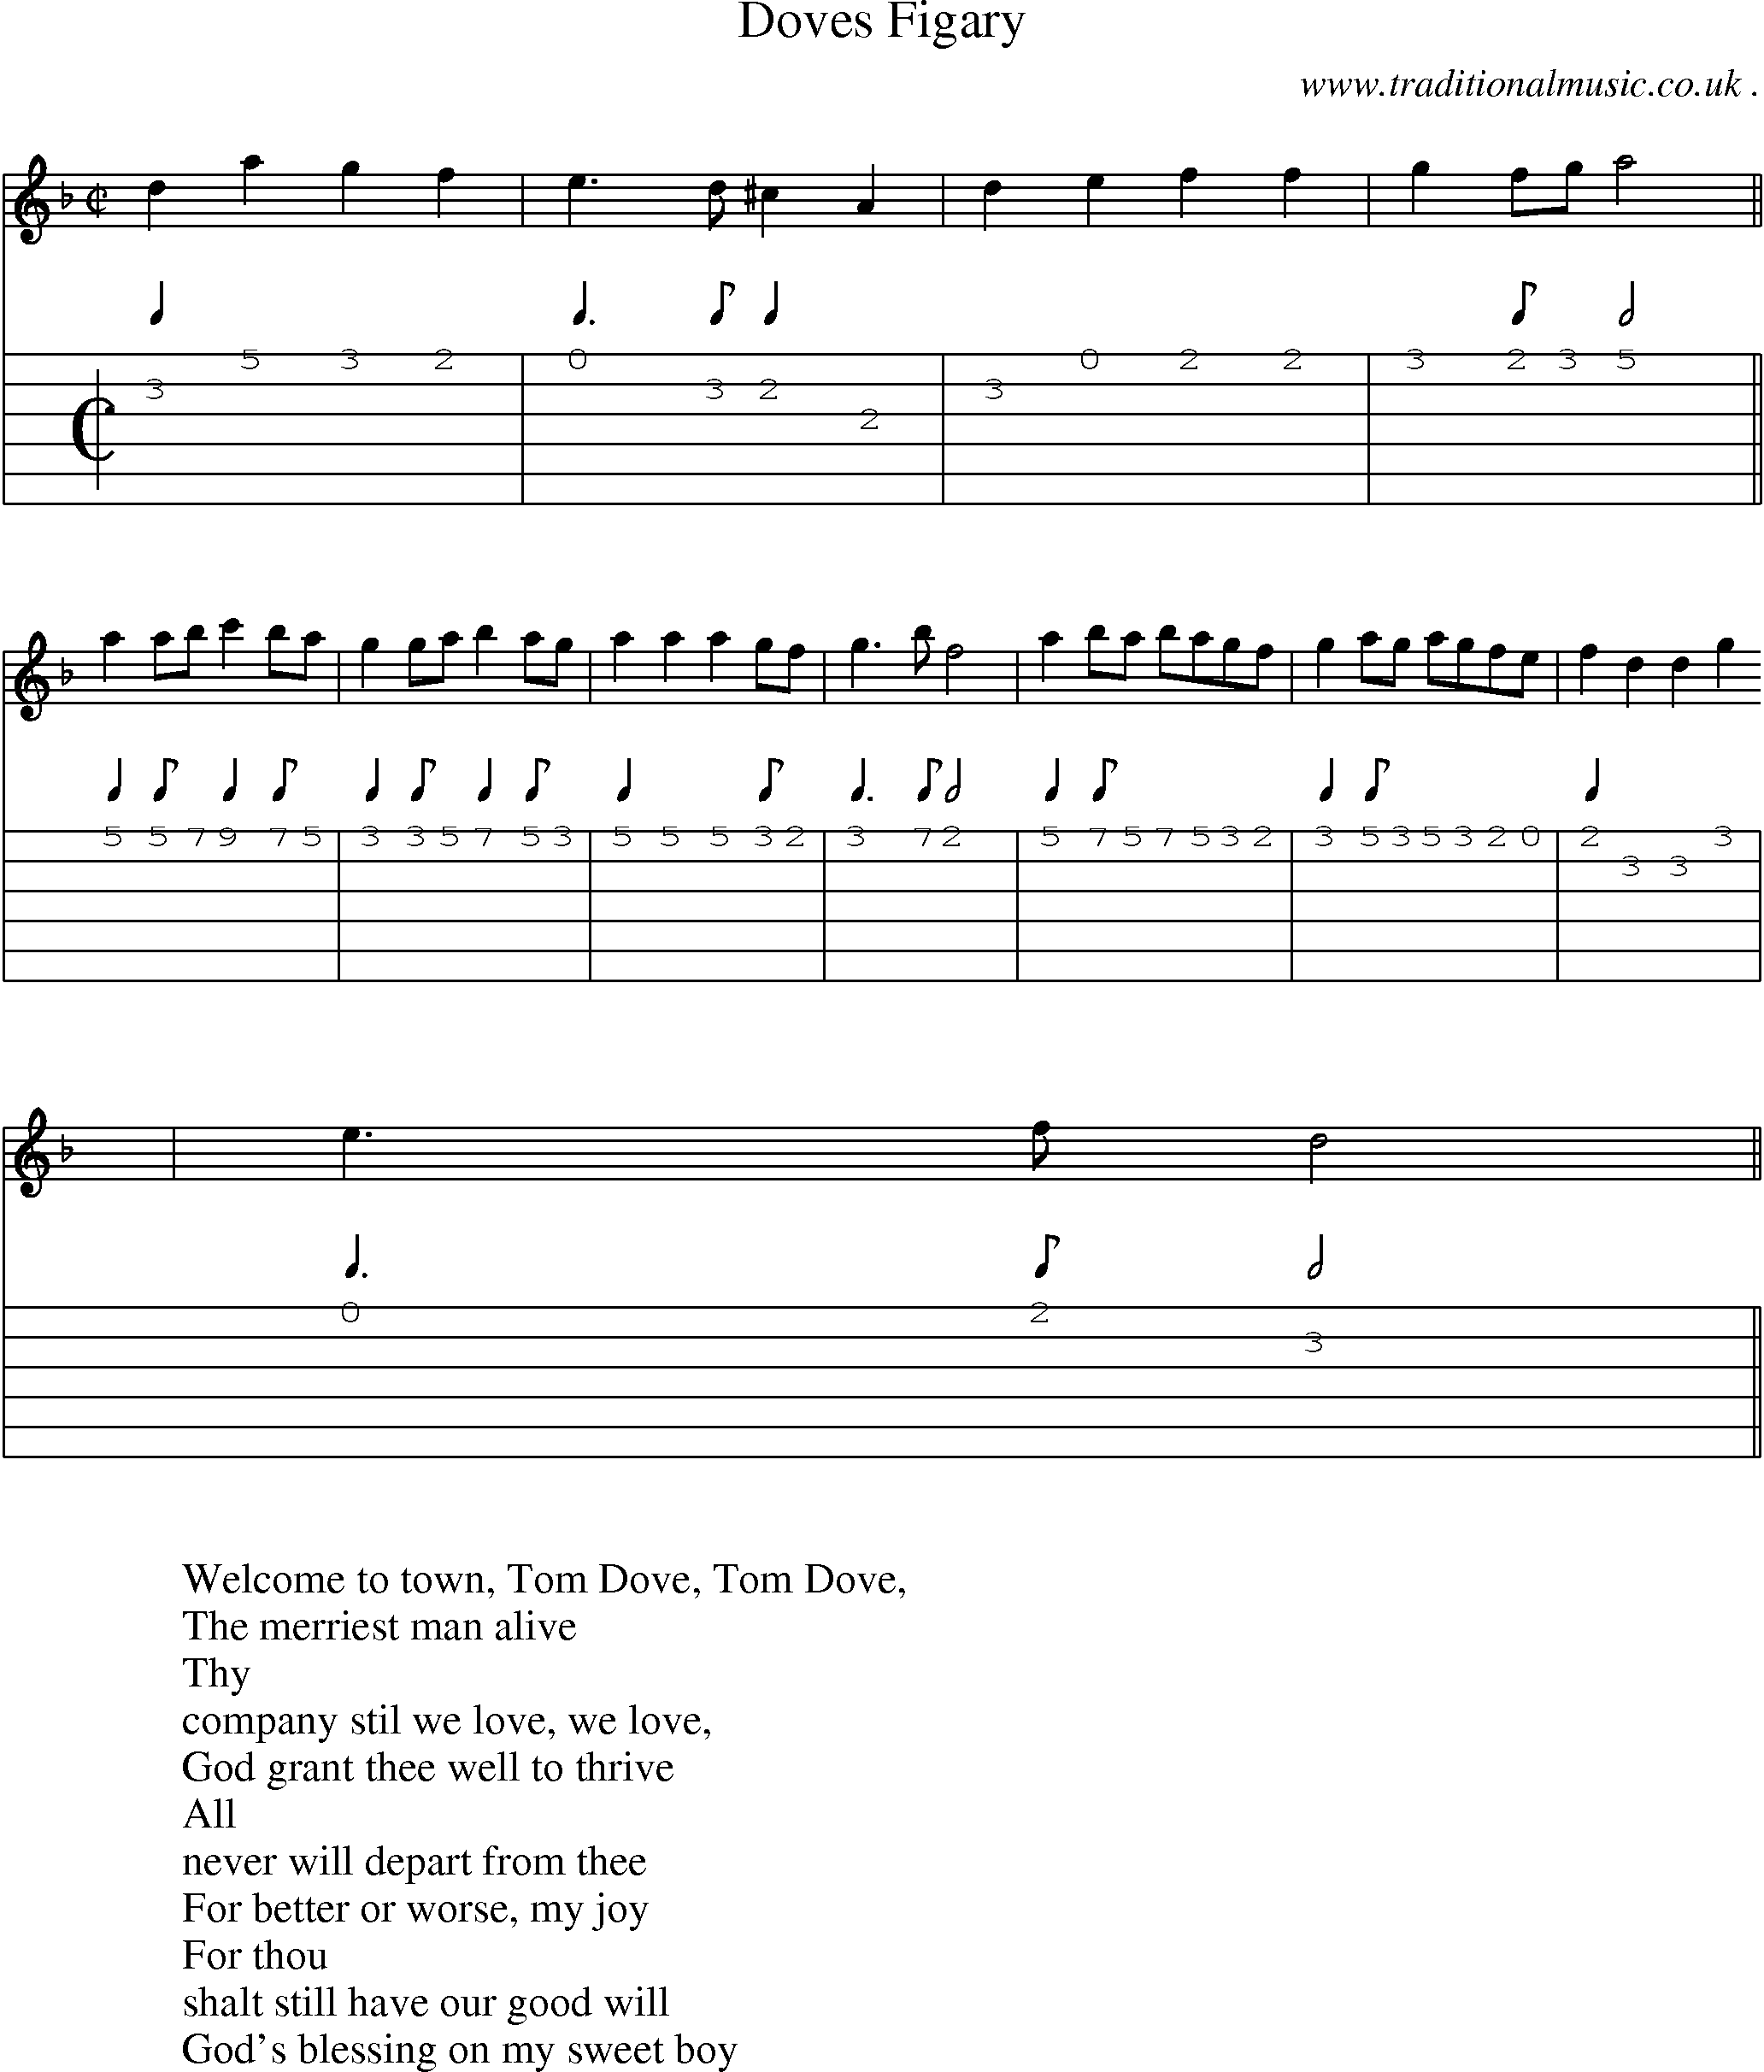 Sheet-Music and Guitar Tabs for Doves Figary